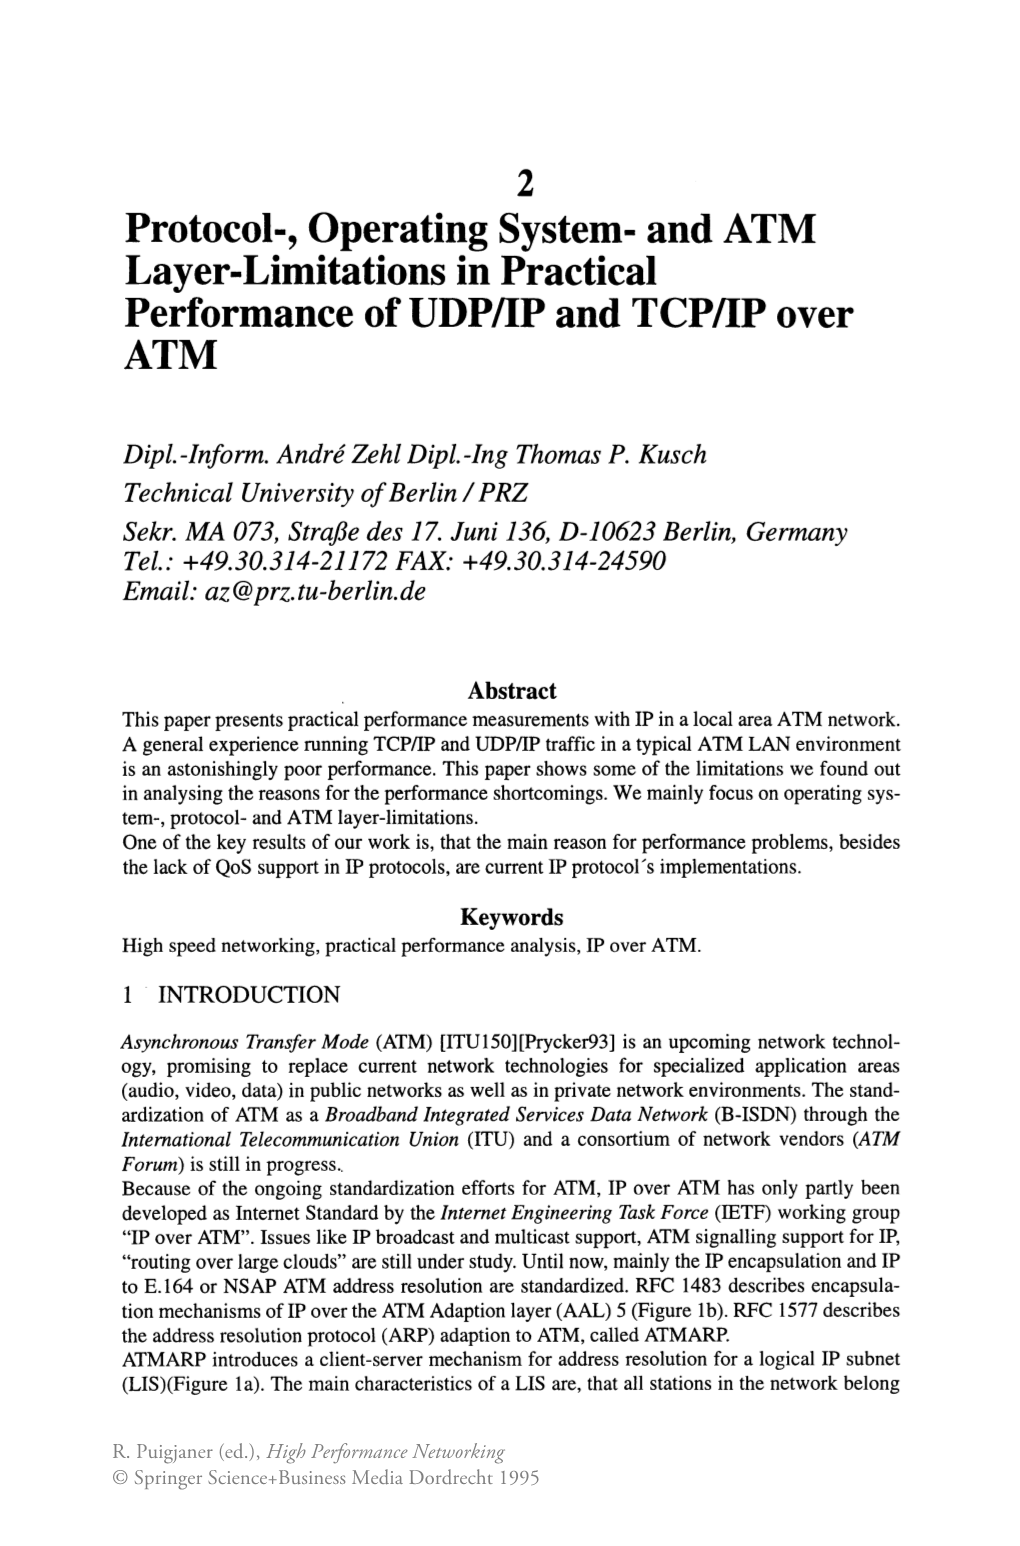 Protocol-, Operating System- and ATM Layer-Limitations in Practical Performance of UDPIIP and TCPIIP Over ATM